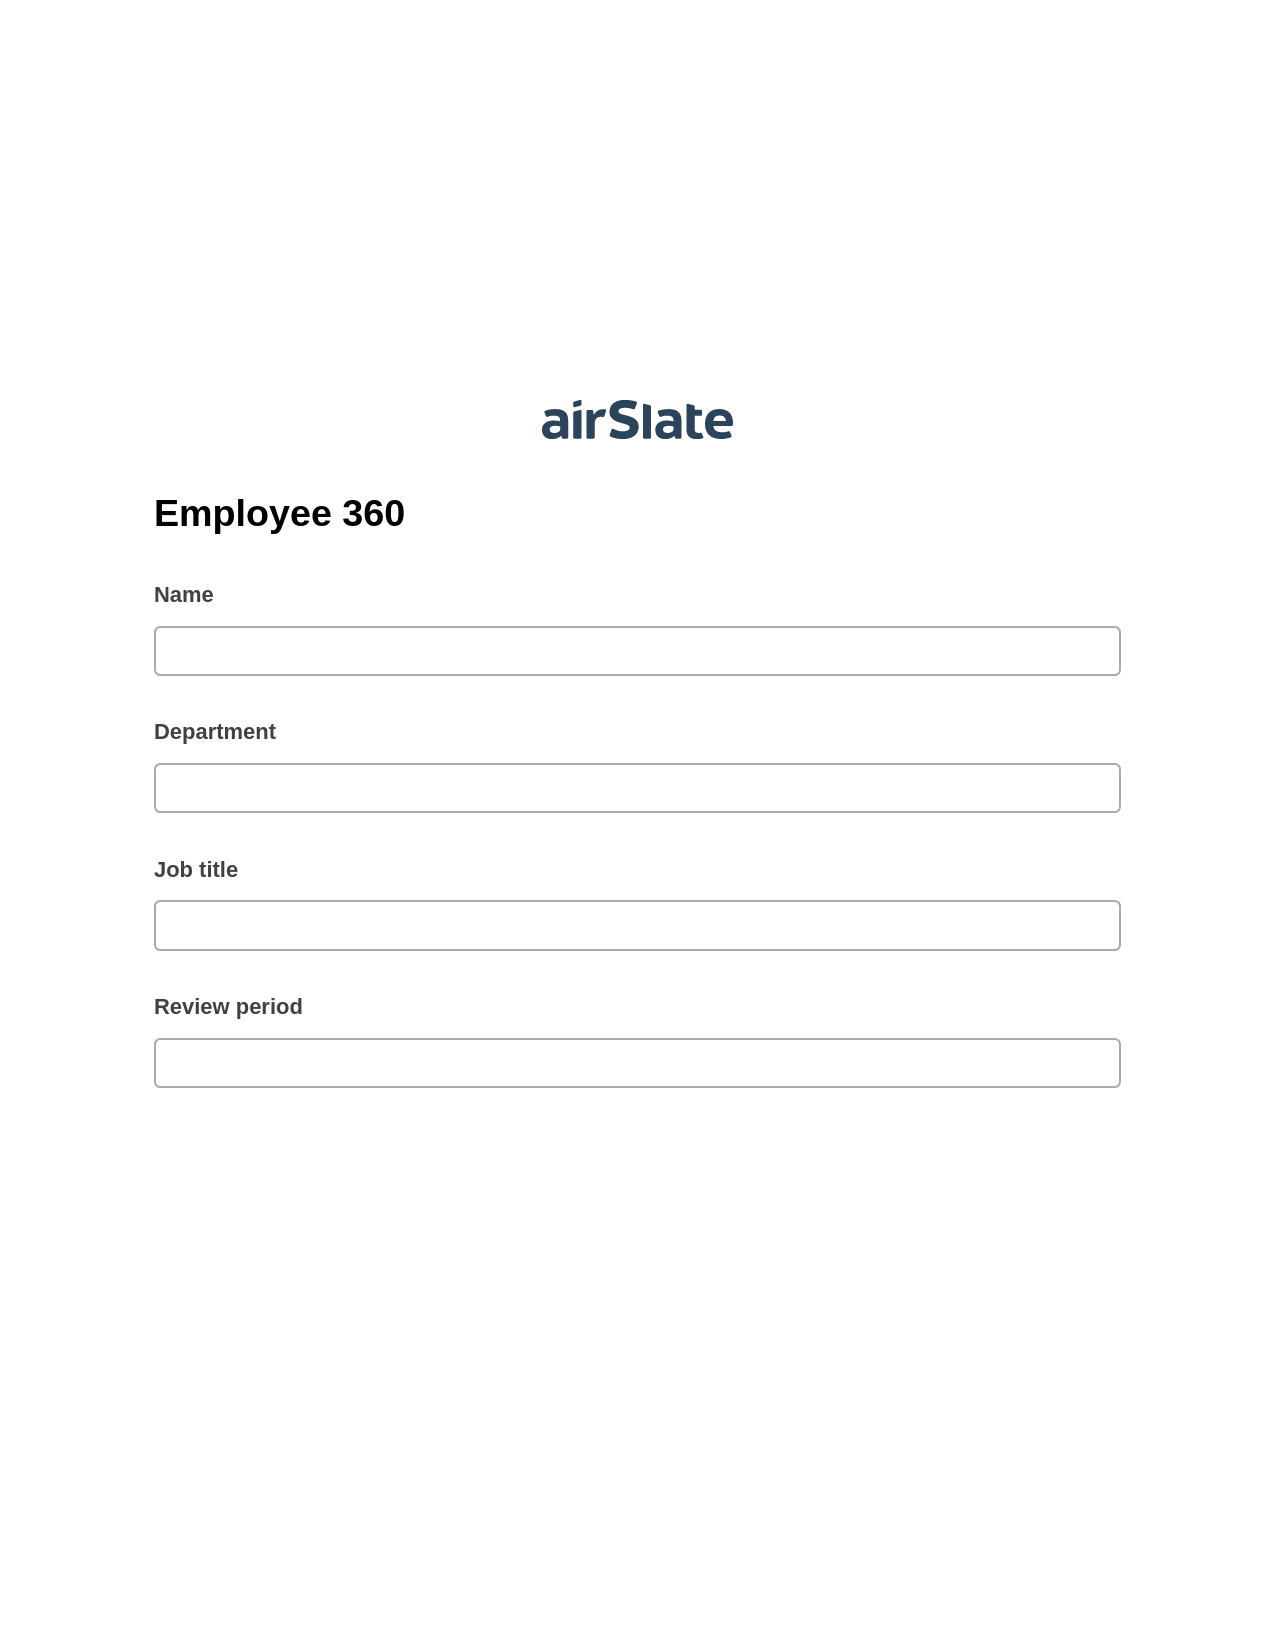 Multirole Employee 360 Pre-fill from CSV File Bot, Rename Slate Bot, Archive to Google Drive Bot